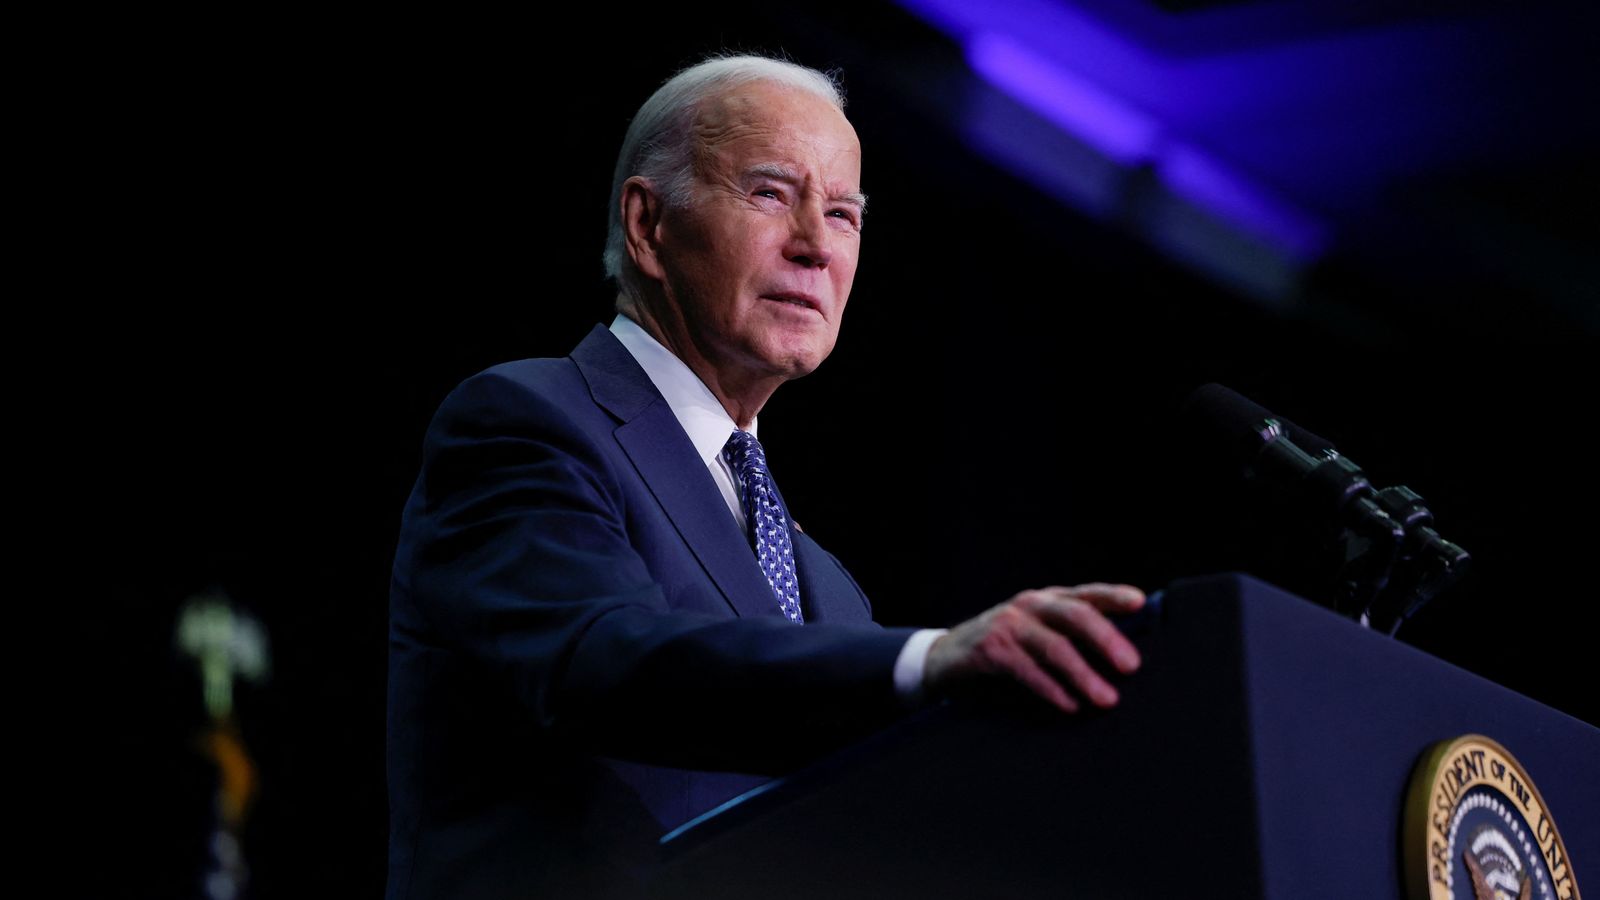 'Elderly' Joe Biden won't face charges over classified documents - and he could not remember when he was vice president, report says